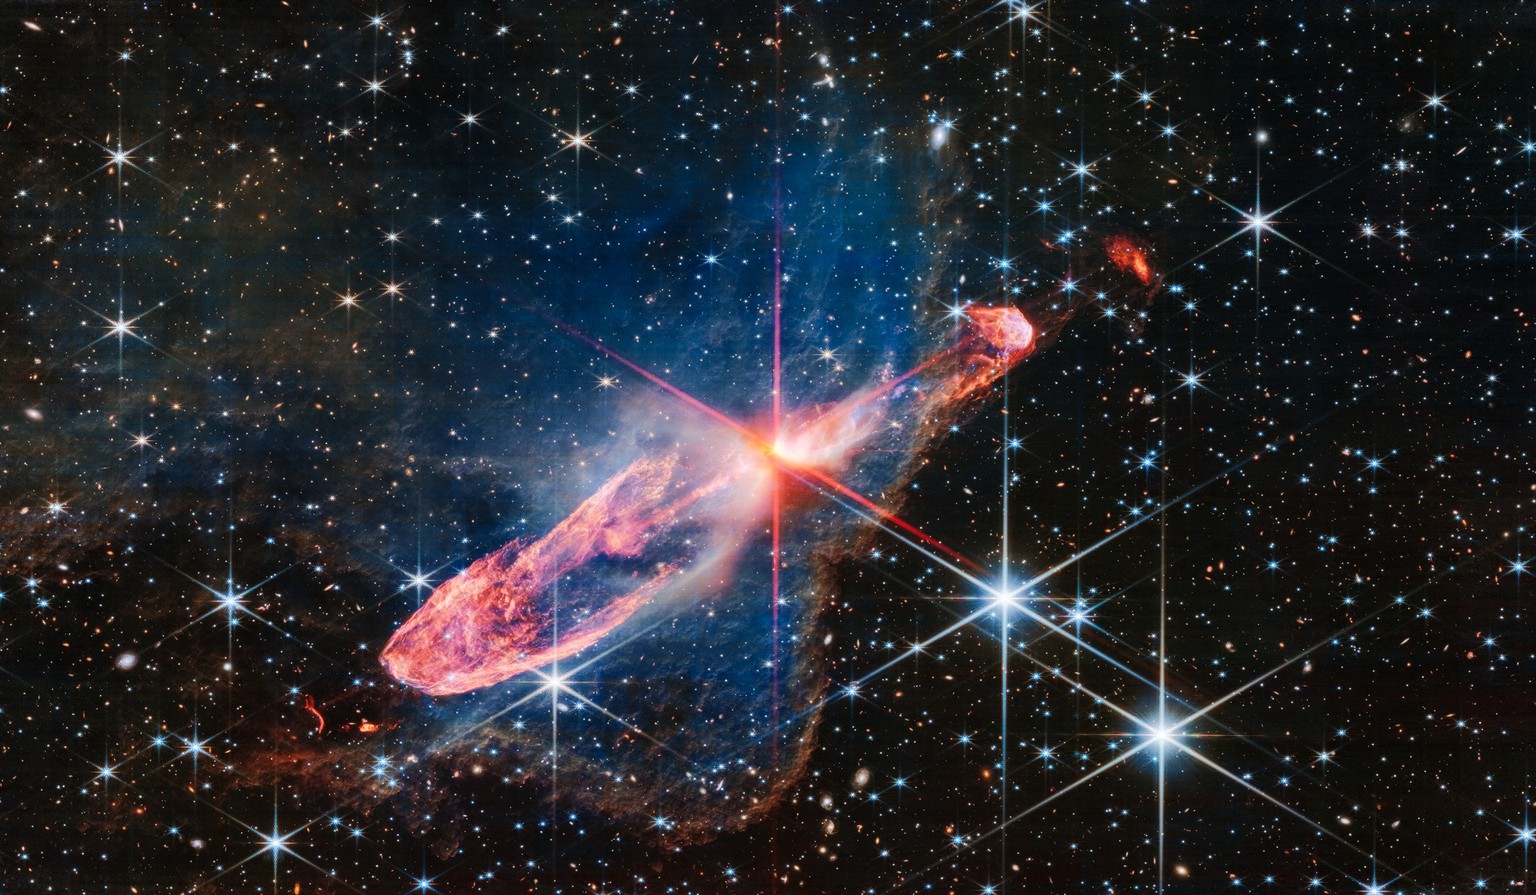 NASA’s James Webb Space Telescope has captured a tightly bound pair of actively forming stars, known as Herbig-Haro 46/47, in high-resolution near-infrared light. Look for them at the center of the re ...